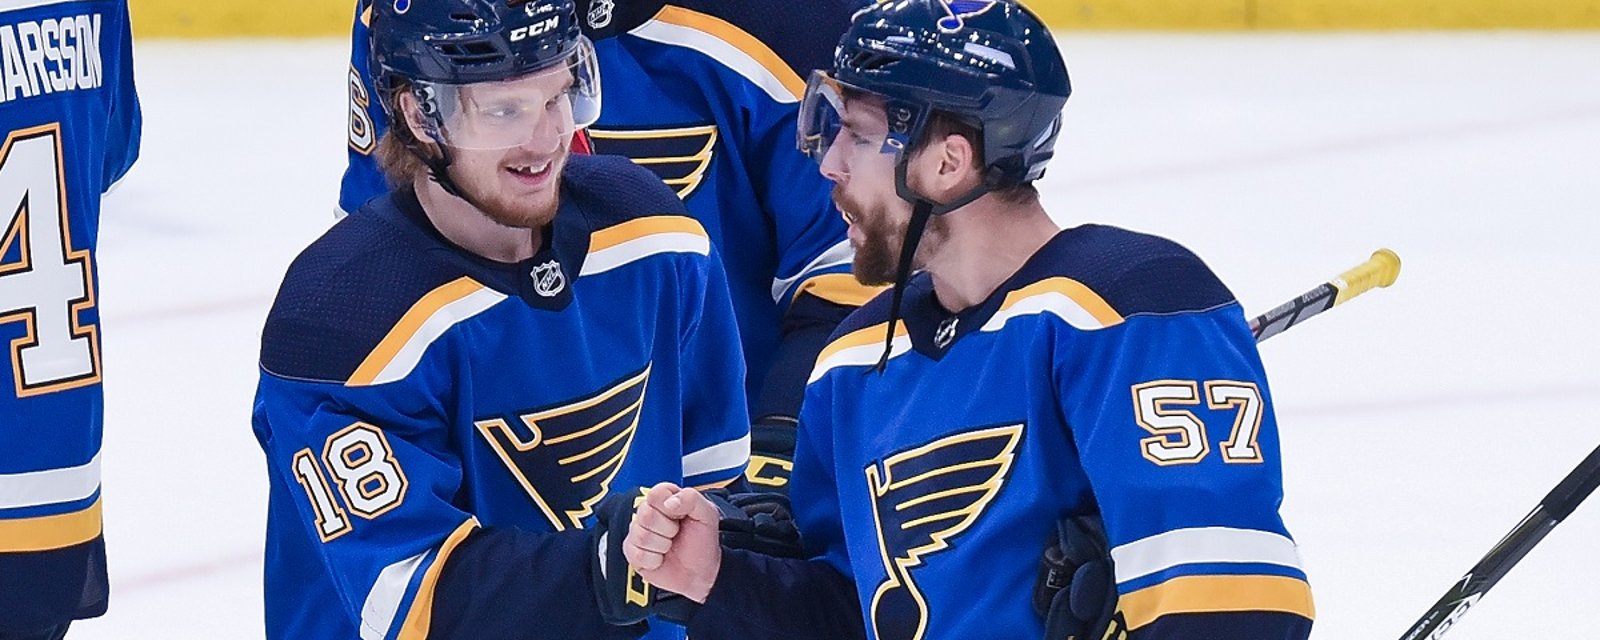 Breaking: Signs point to a huge return for the Blues ahead of Game 6.